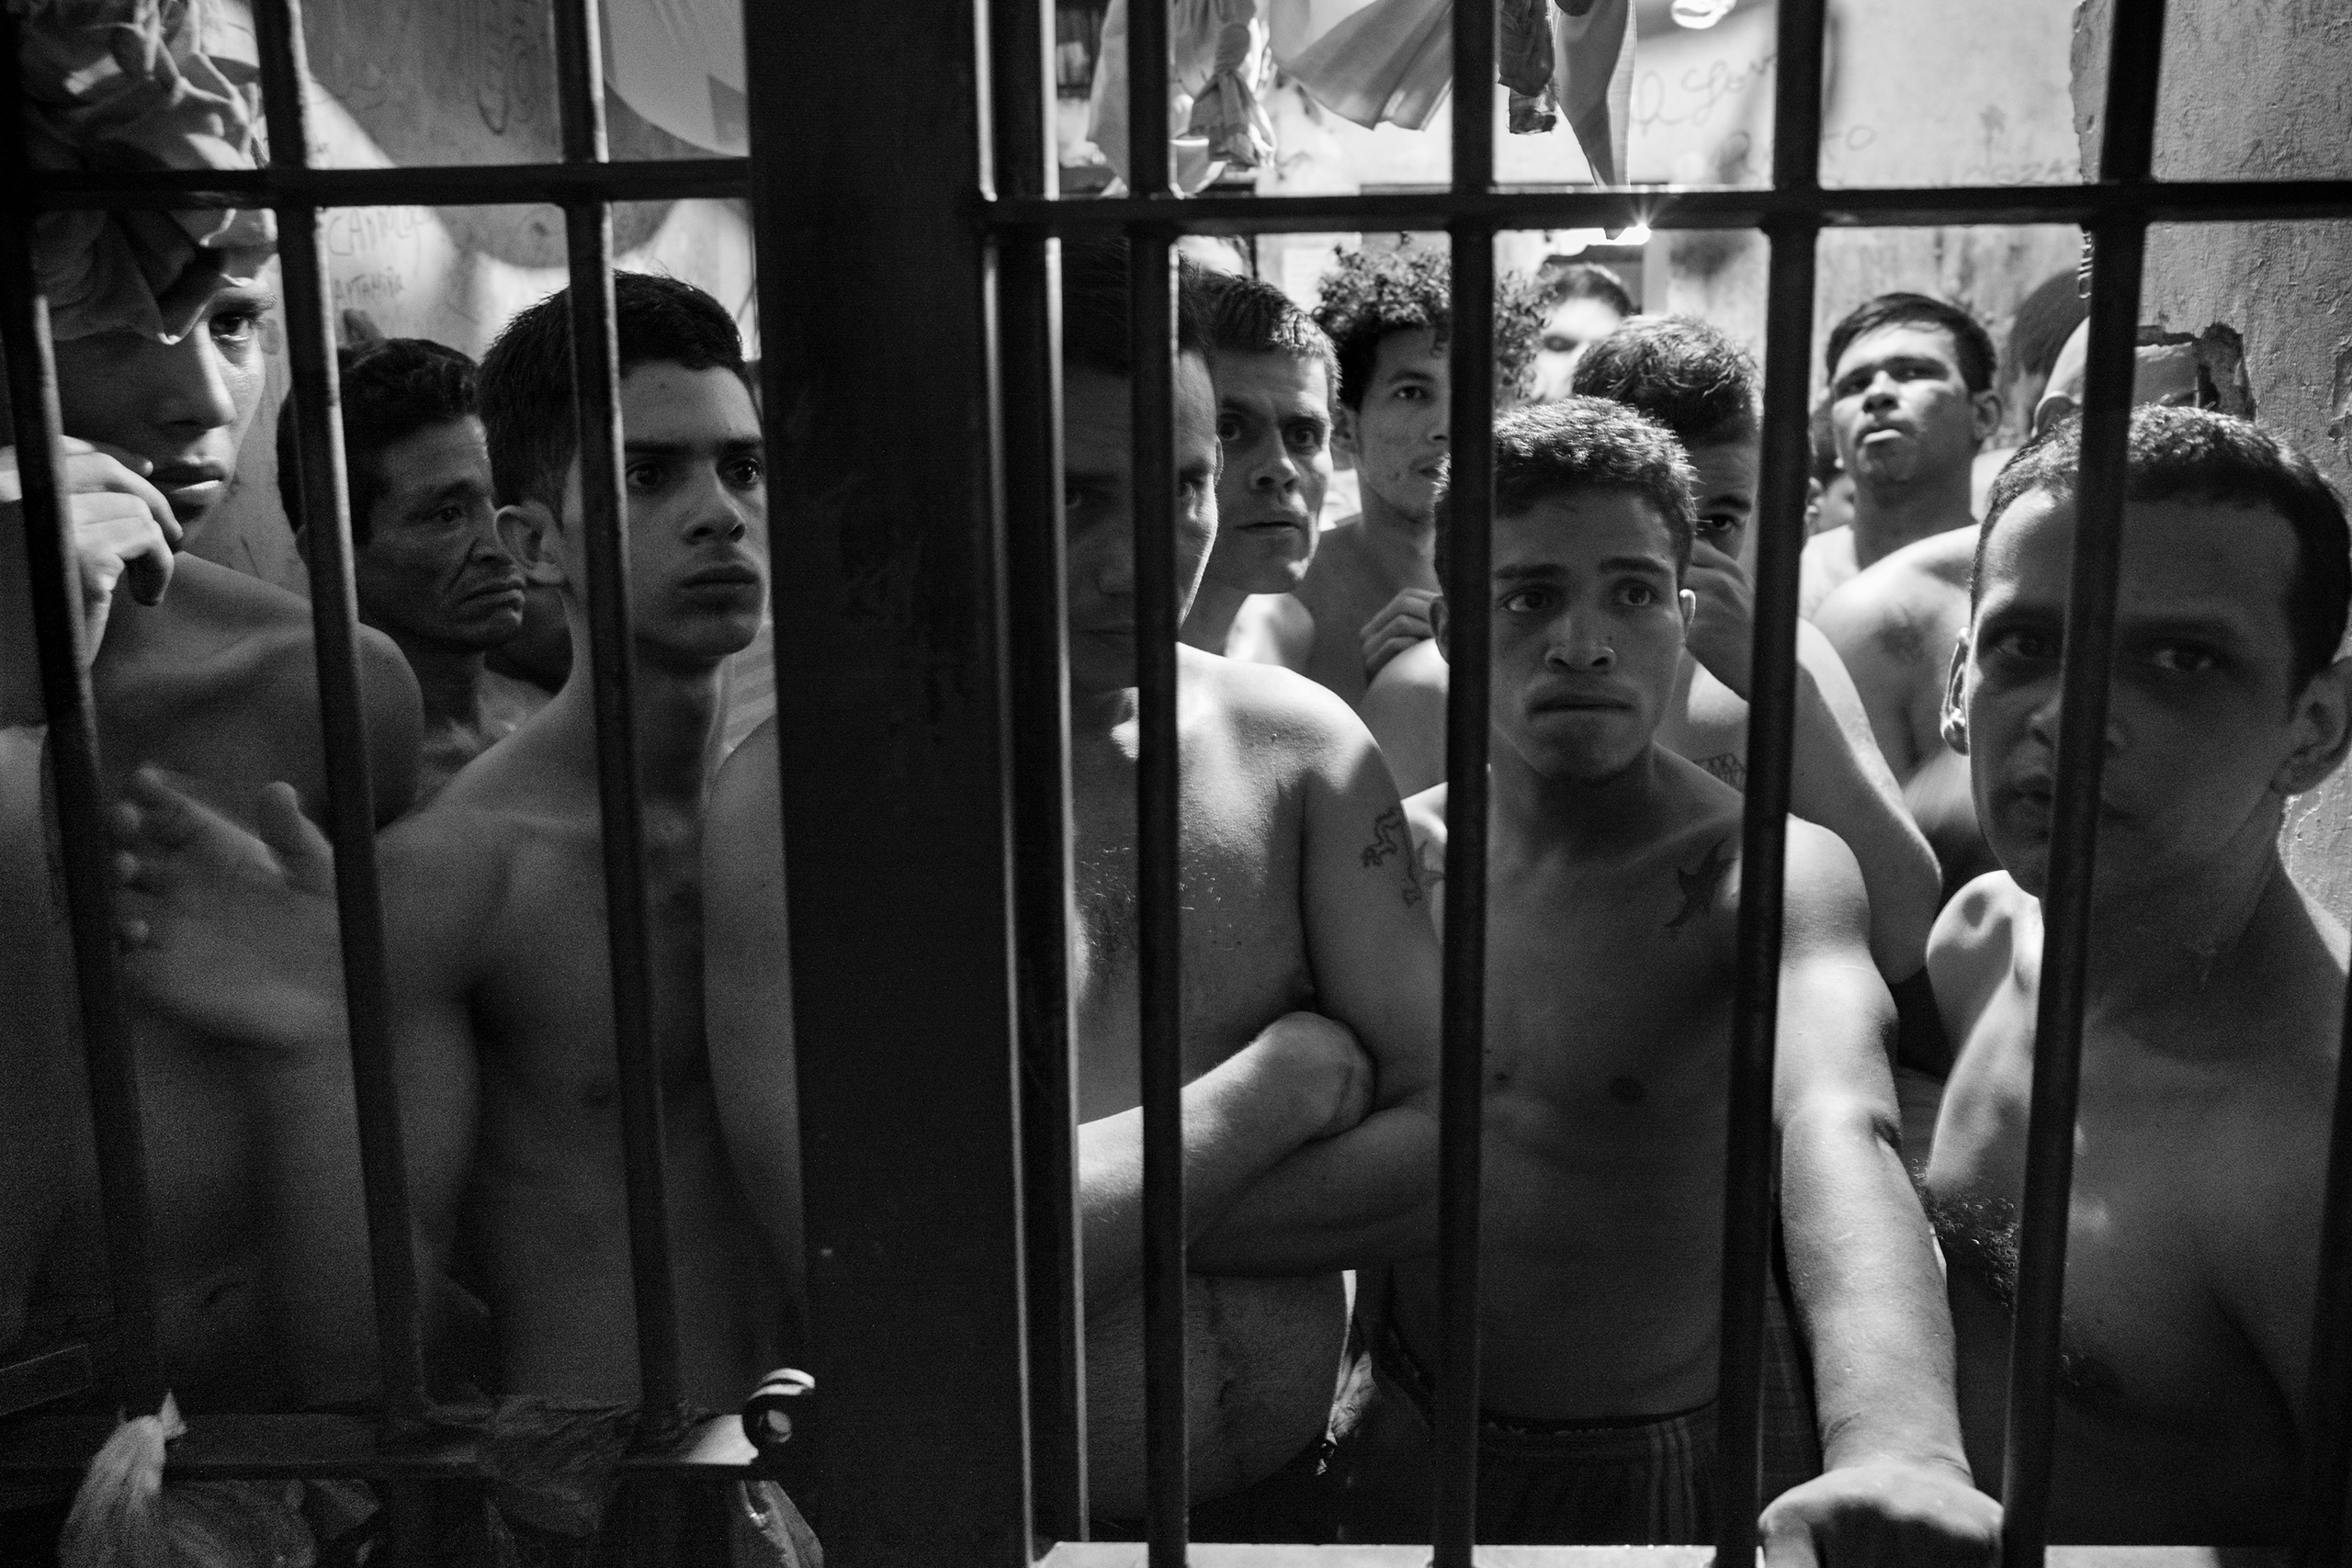 A group of prisoners locked in their cells inside the municipal police station of Chacao, east of Caracas, Venezuela, May 27, 2016. (Alvaro Ybarra Zavala—Getty Images Reportage for TIME)